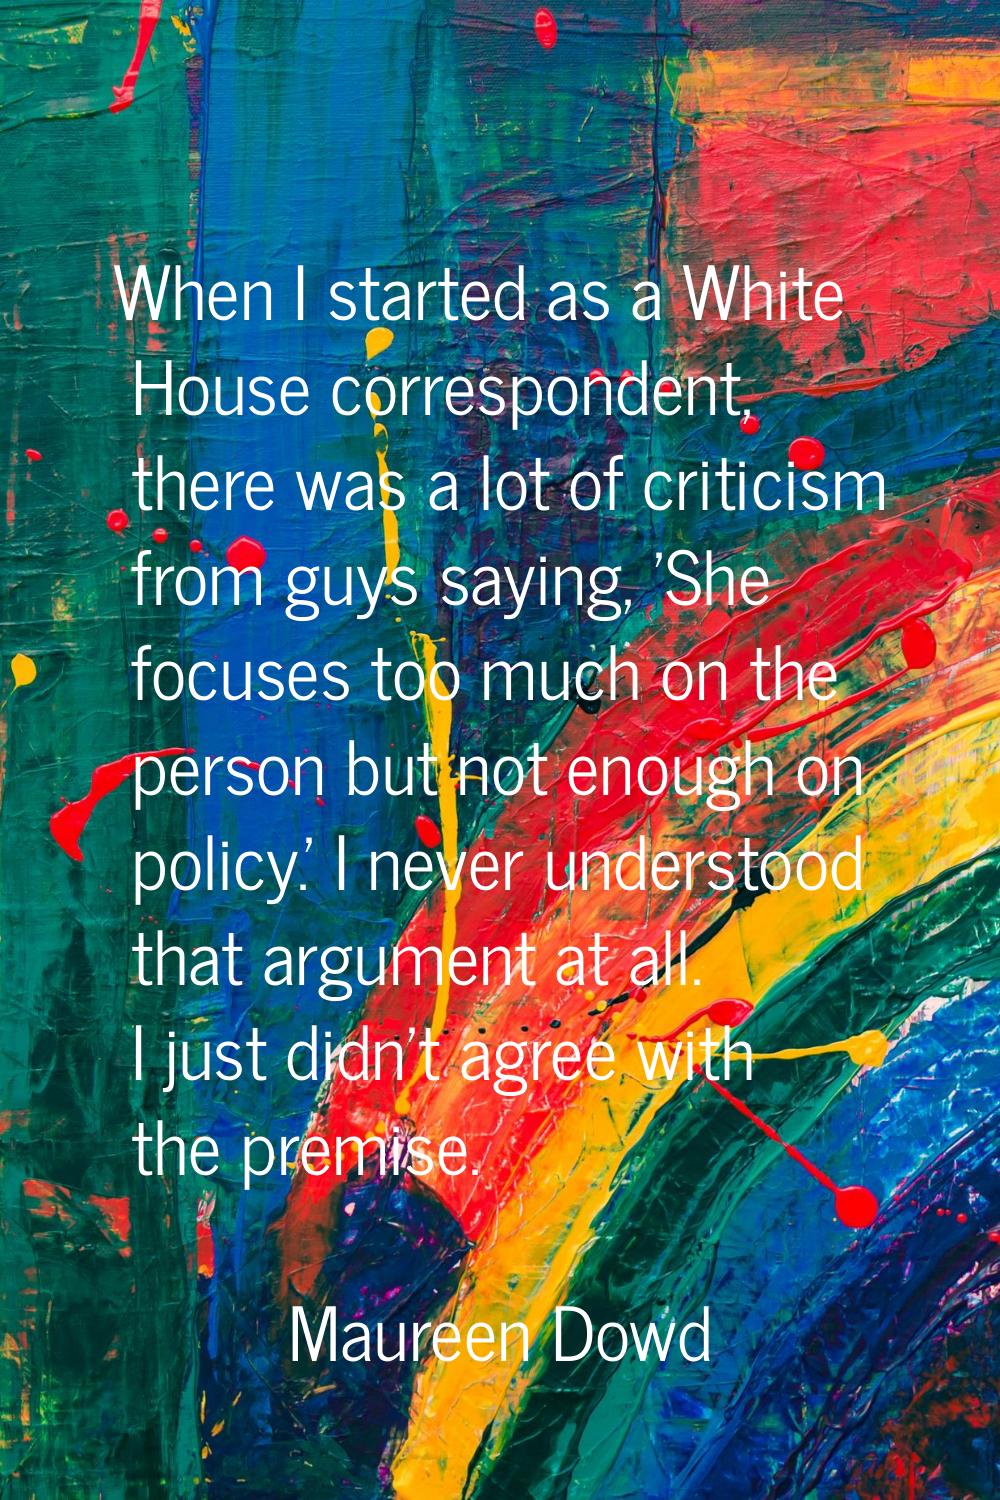 When I started as a White House correspondent, there was a lot of criticism from guys saying, 'She 